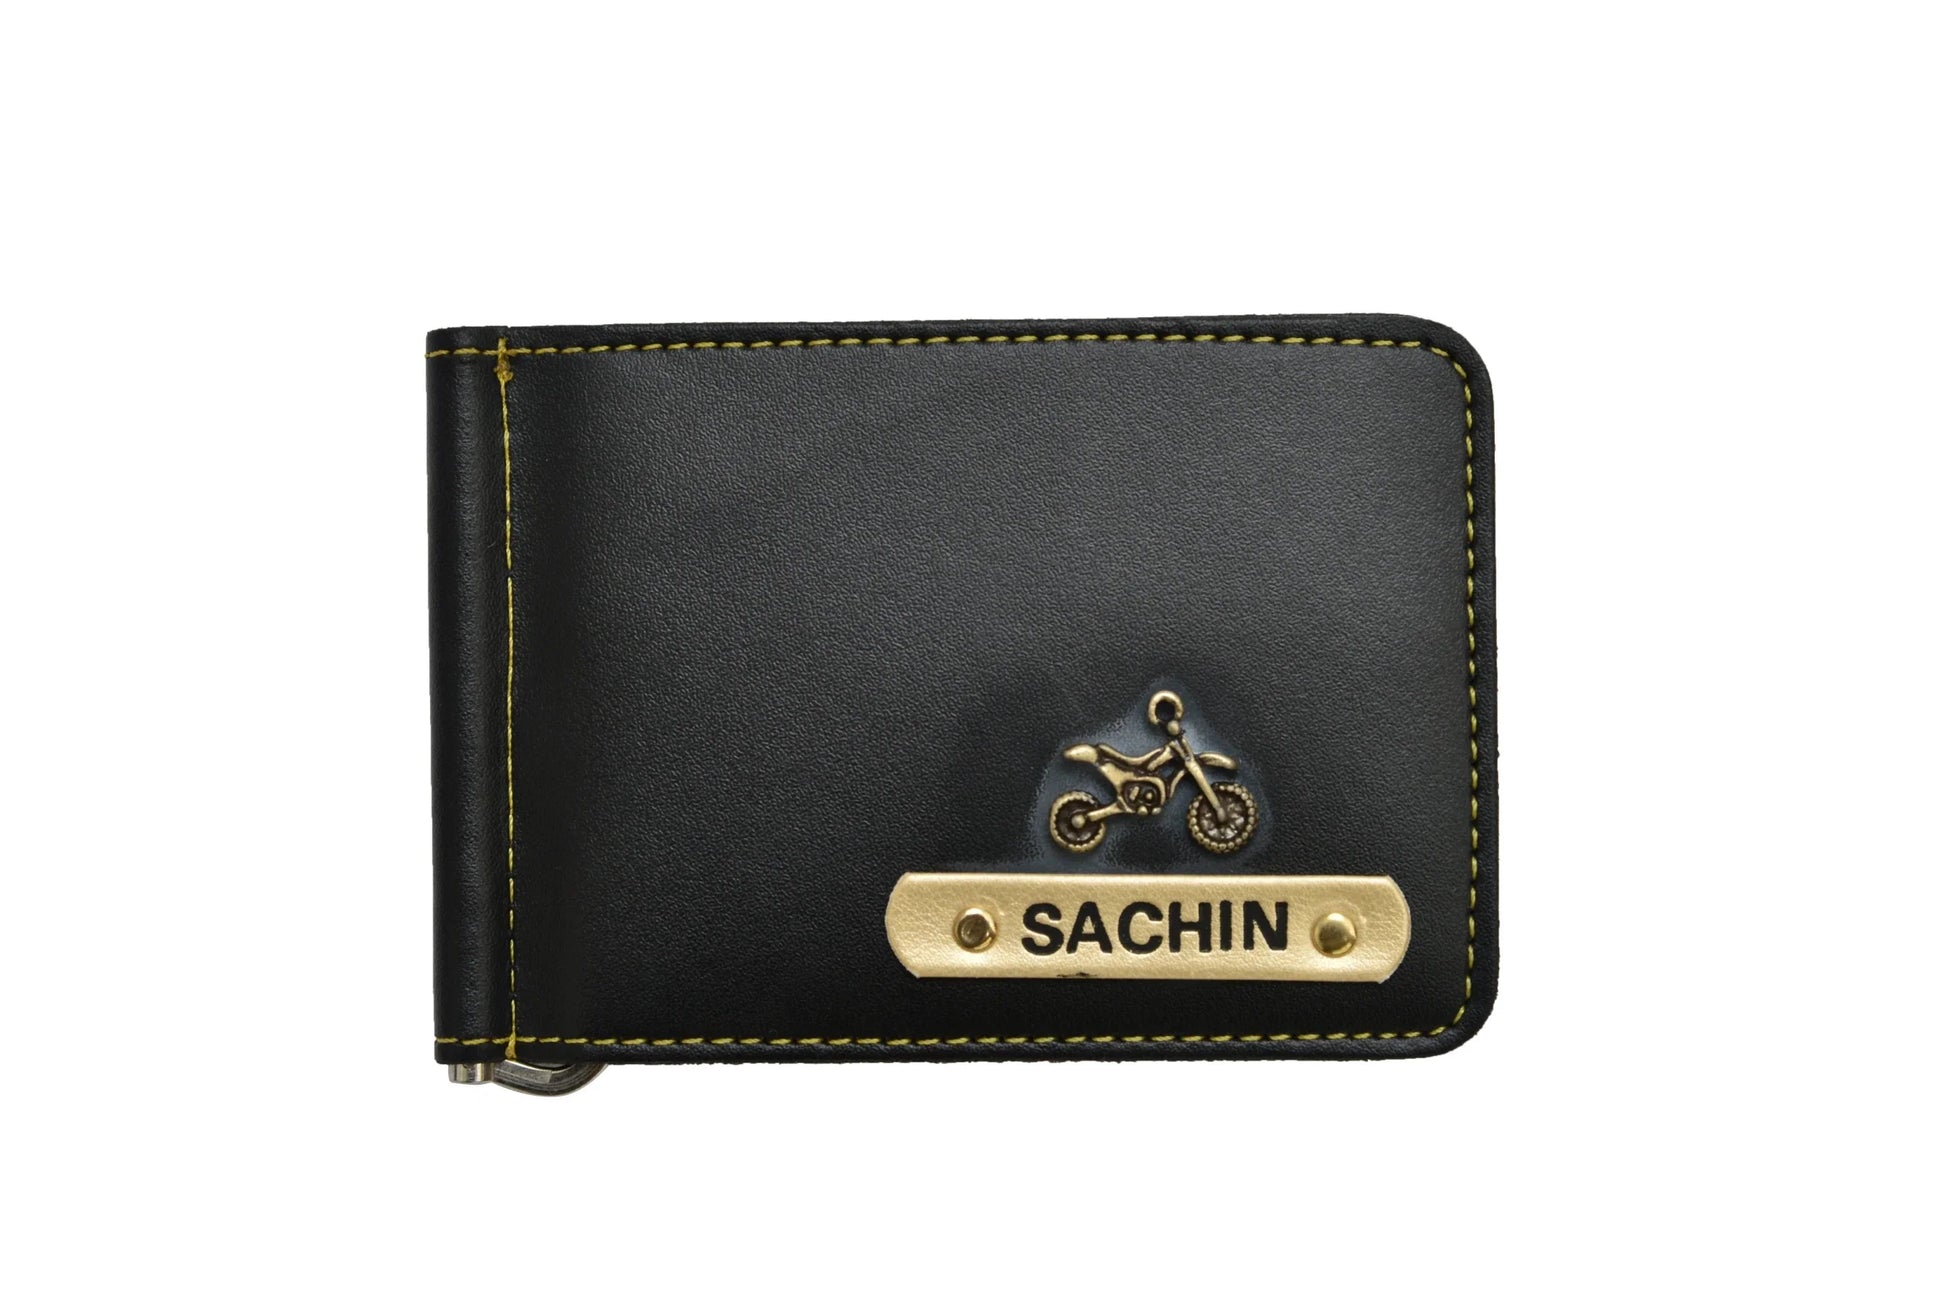 Make a statement with this personalized vegan leather money clip, available in a range of colors.